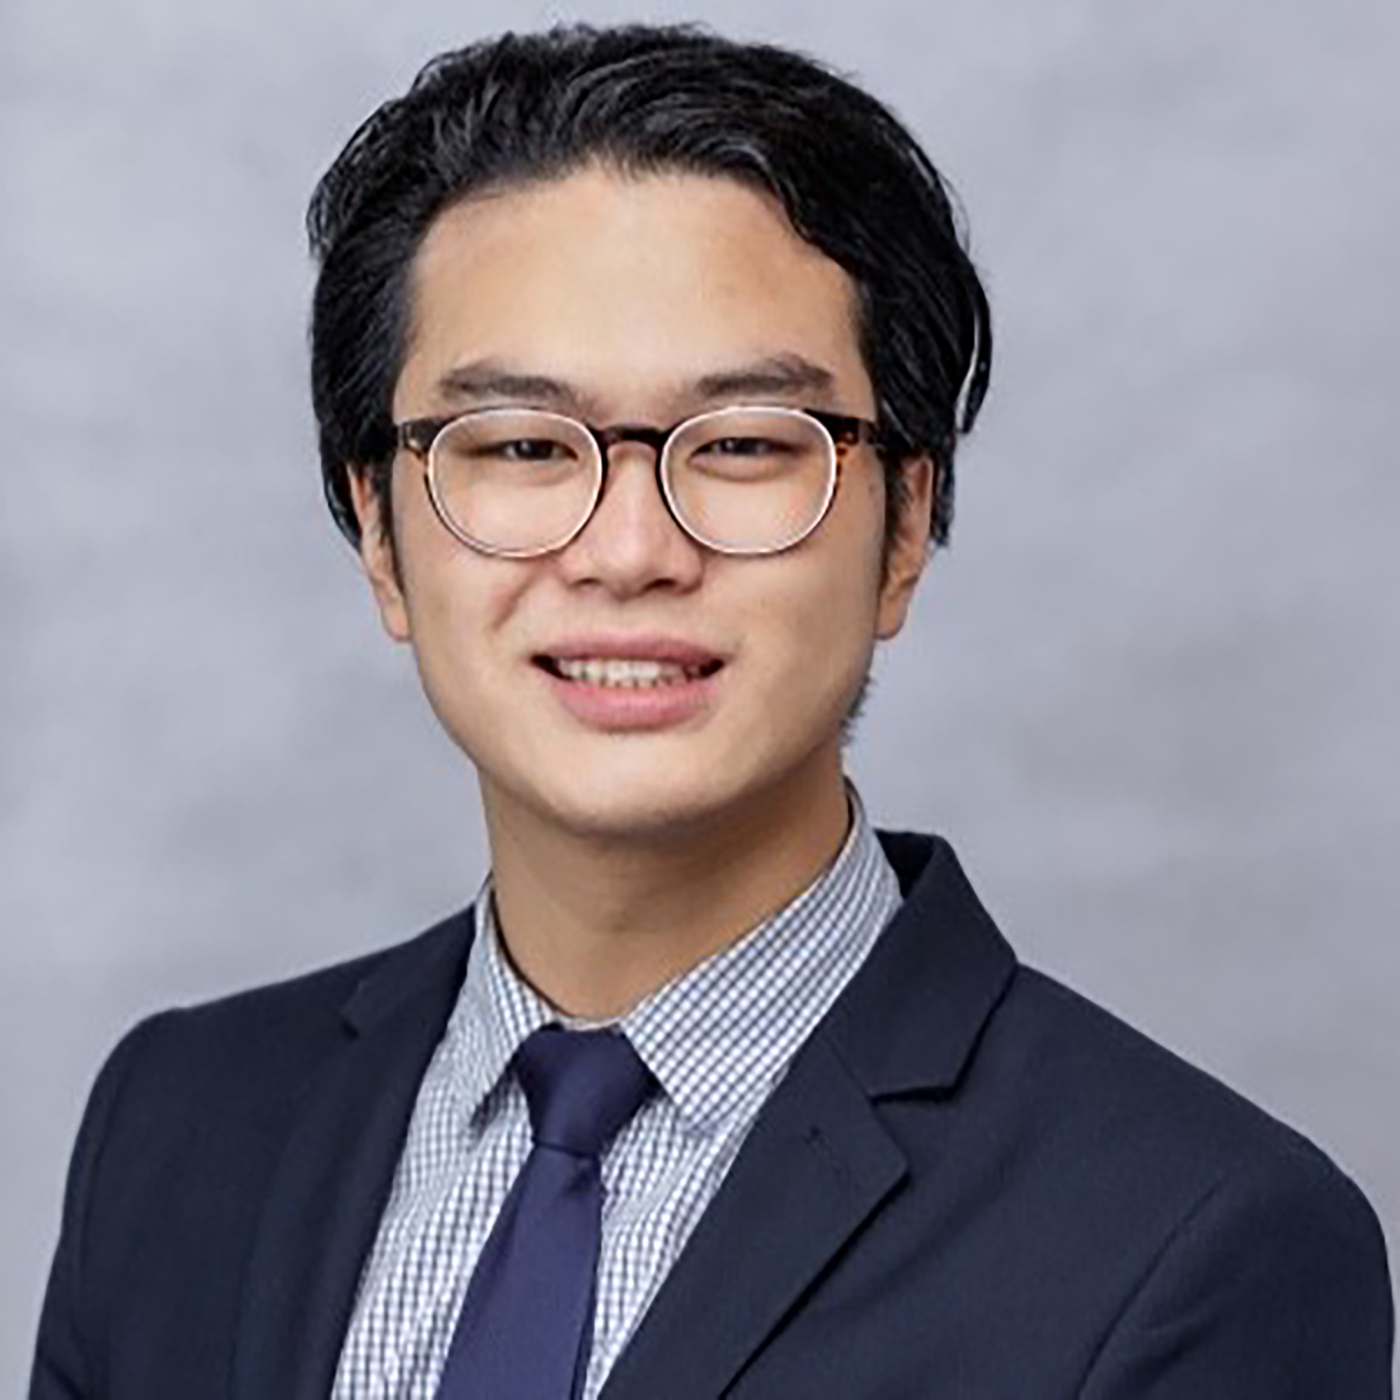 An image of an Asian man wearing glasses and a suit smiling at the camera.